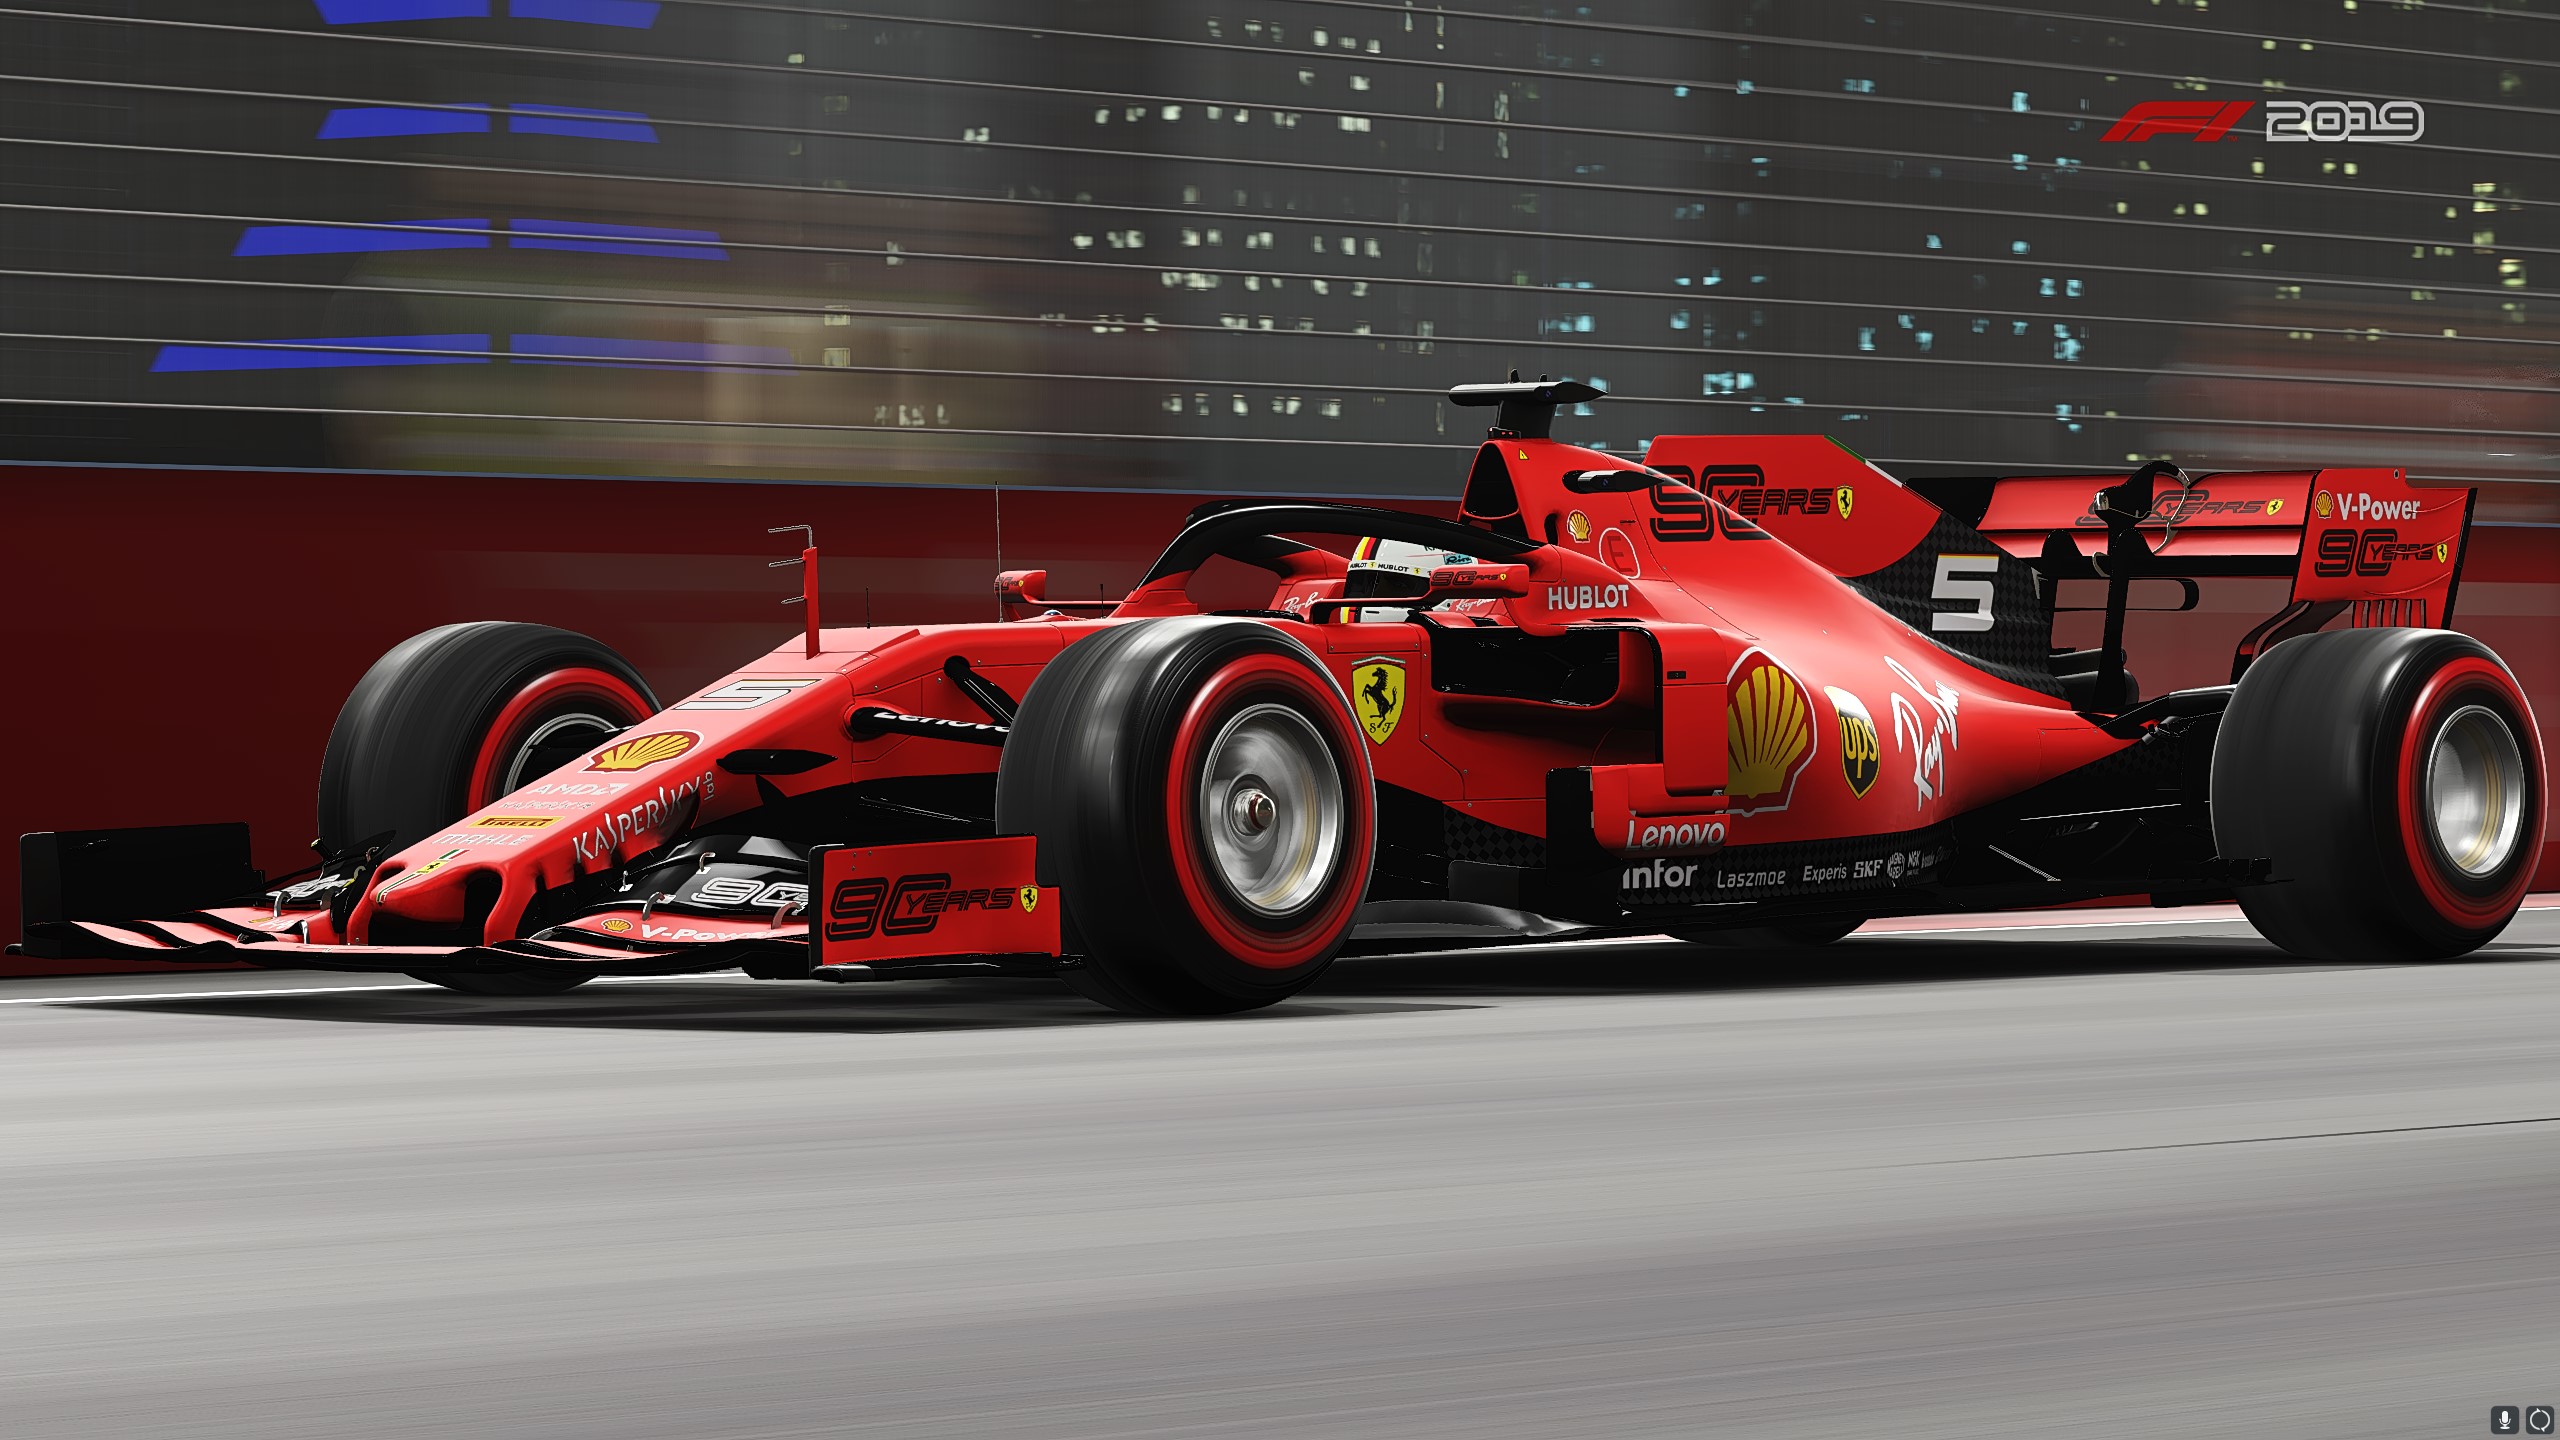 F1 2019 Wallpapers, Pictures, Images